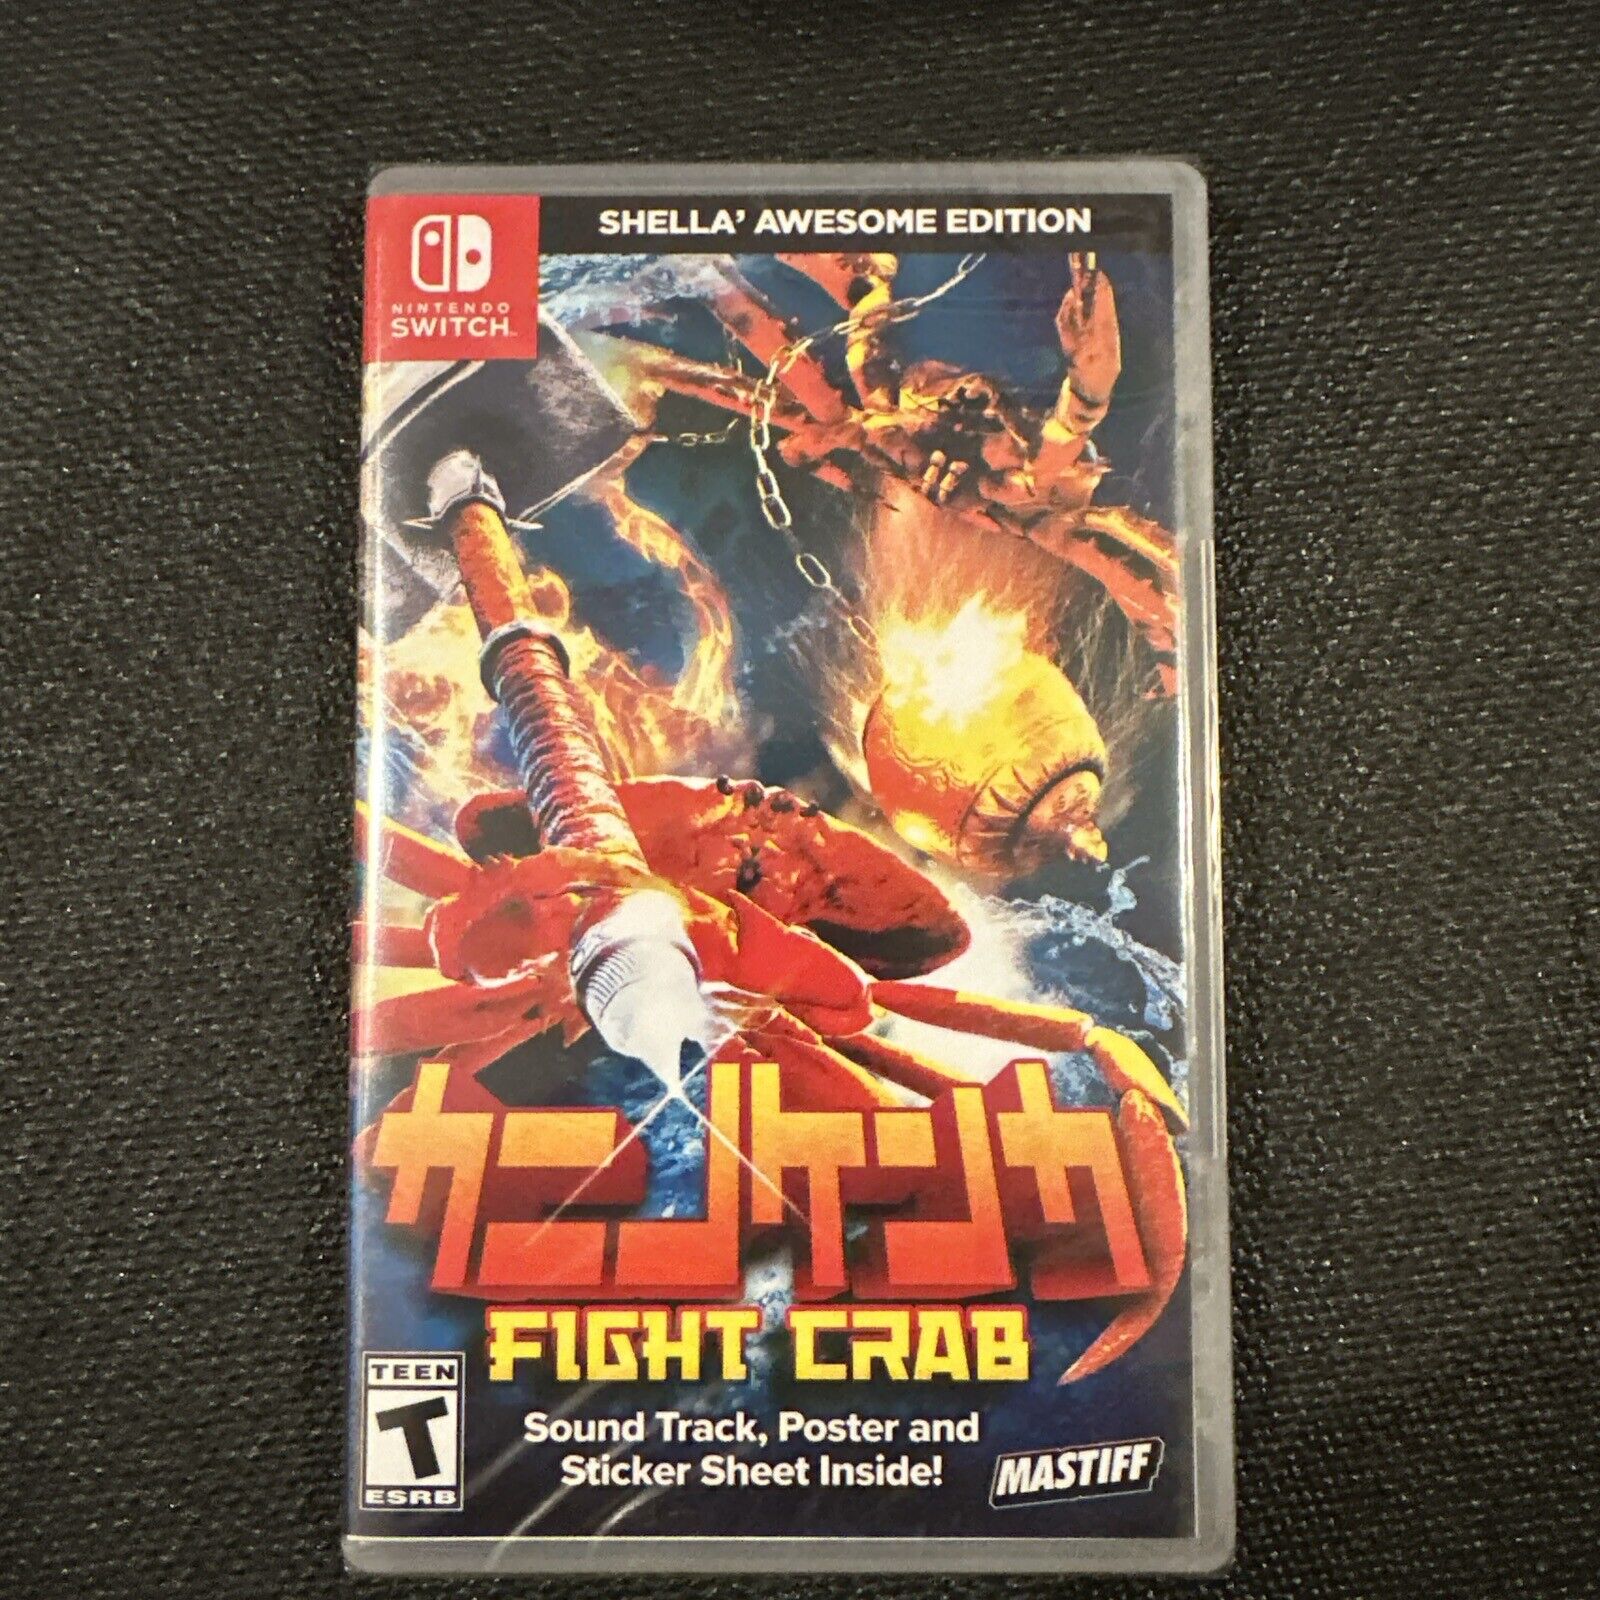 FIGHT CRAB Shella' Awesome Edition Brand New NINTENDO SWITCH Game ESRB Release